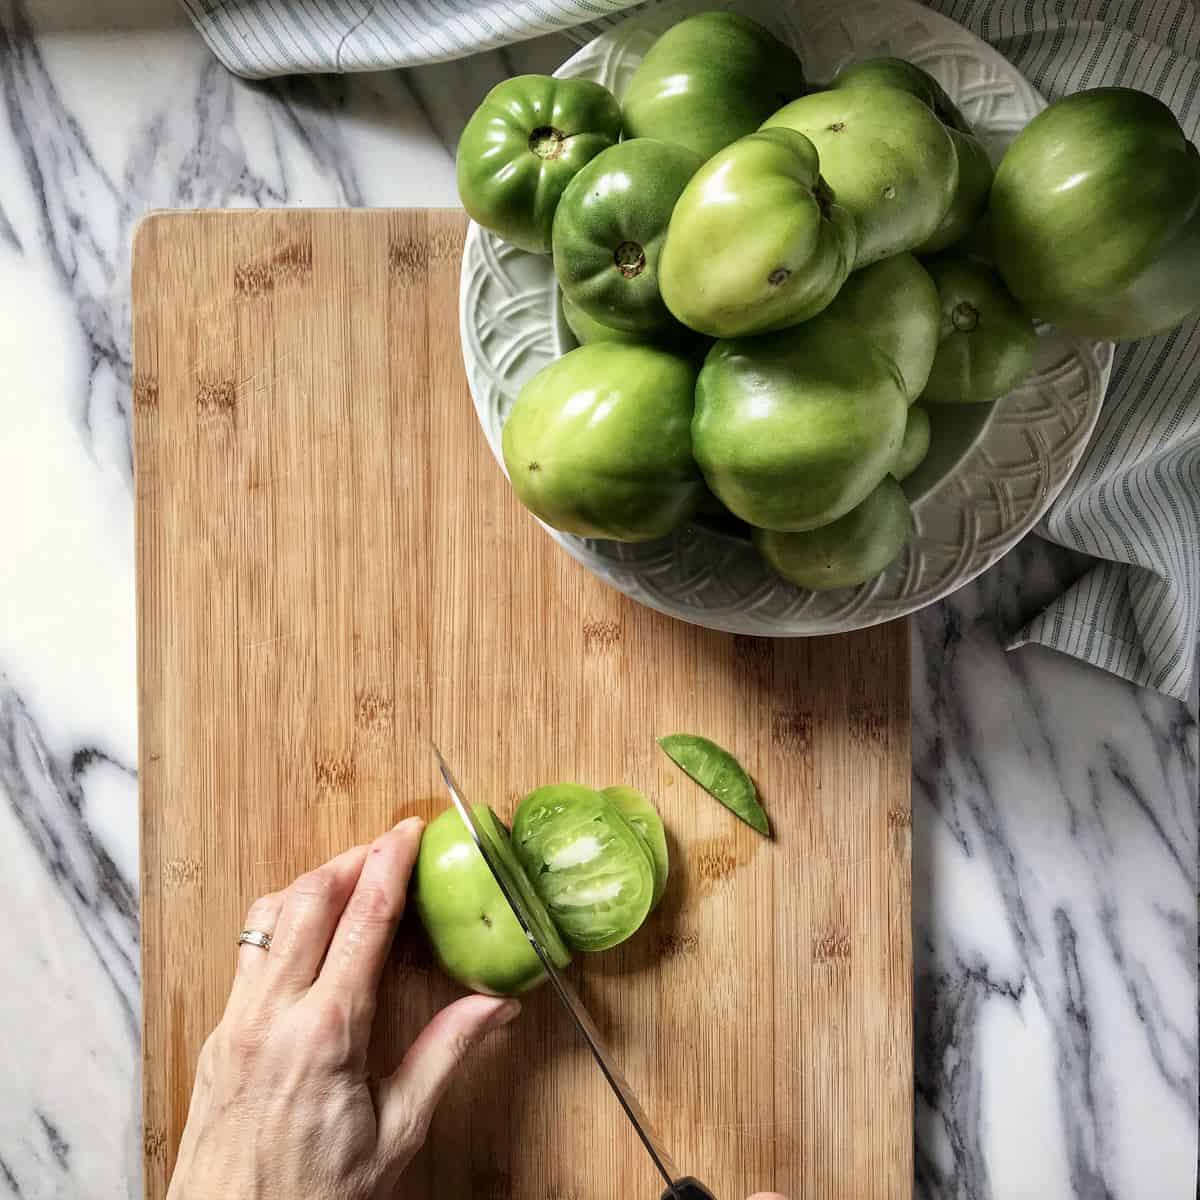 Green tomatoes being sliced on a wooden board to make green tomato jam.